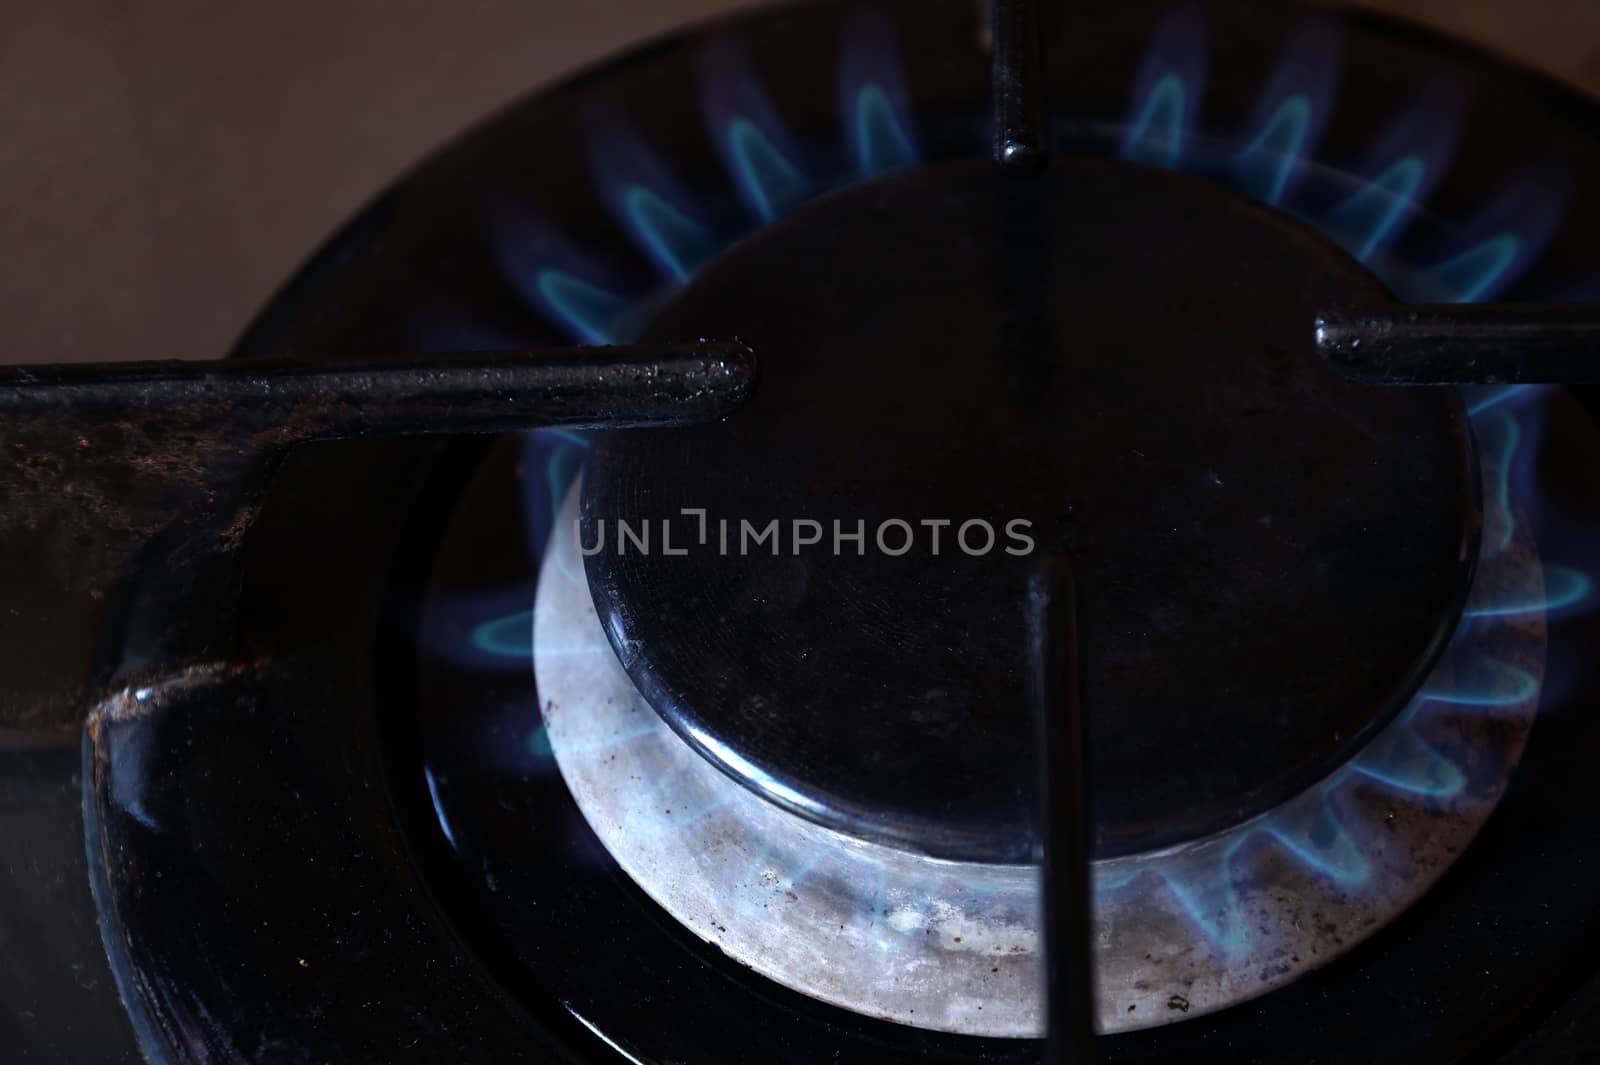 The burning gas ring on the stove